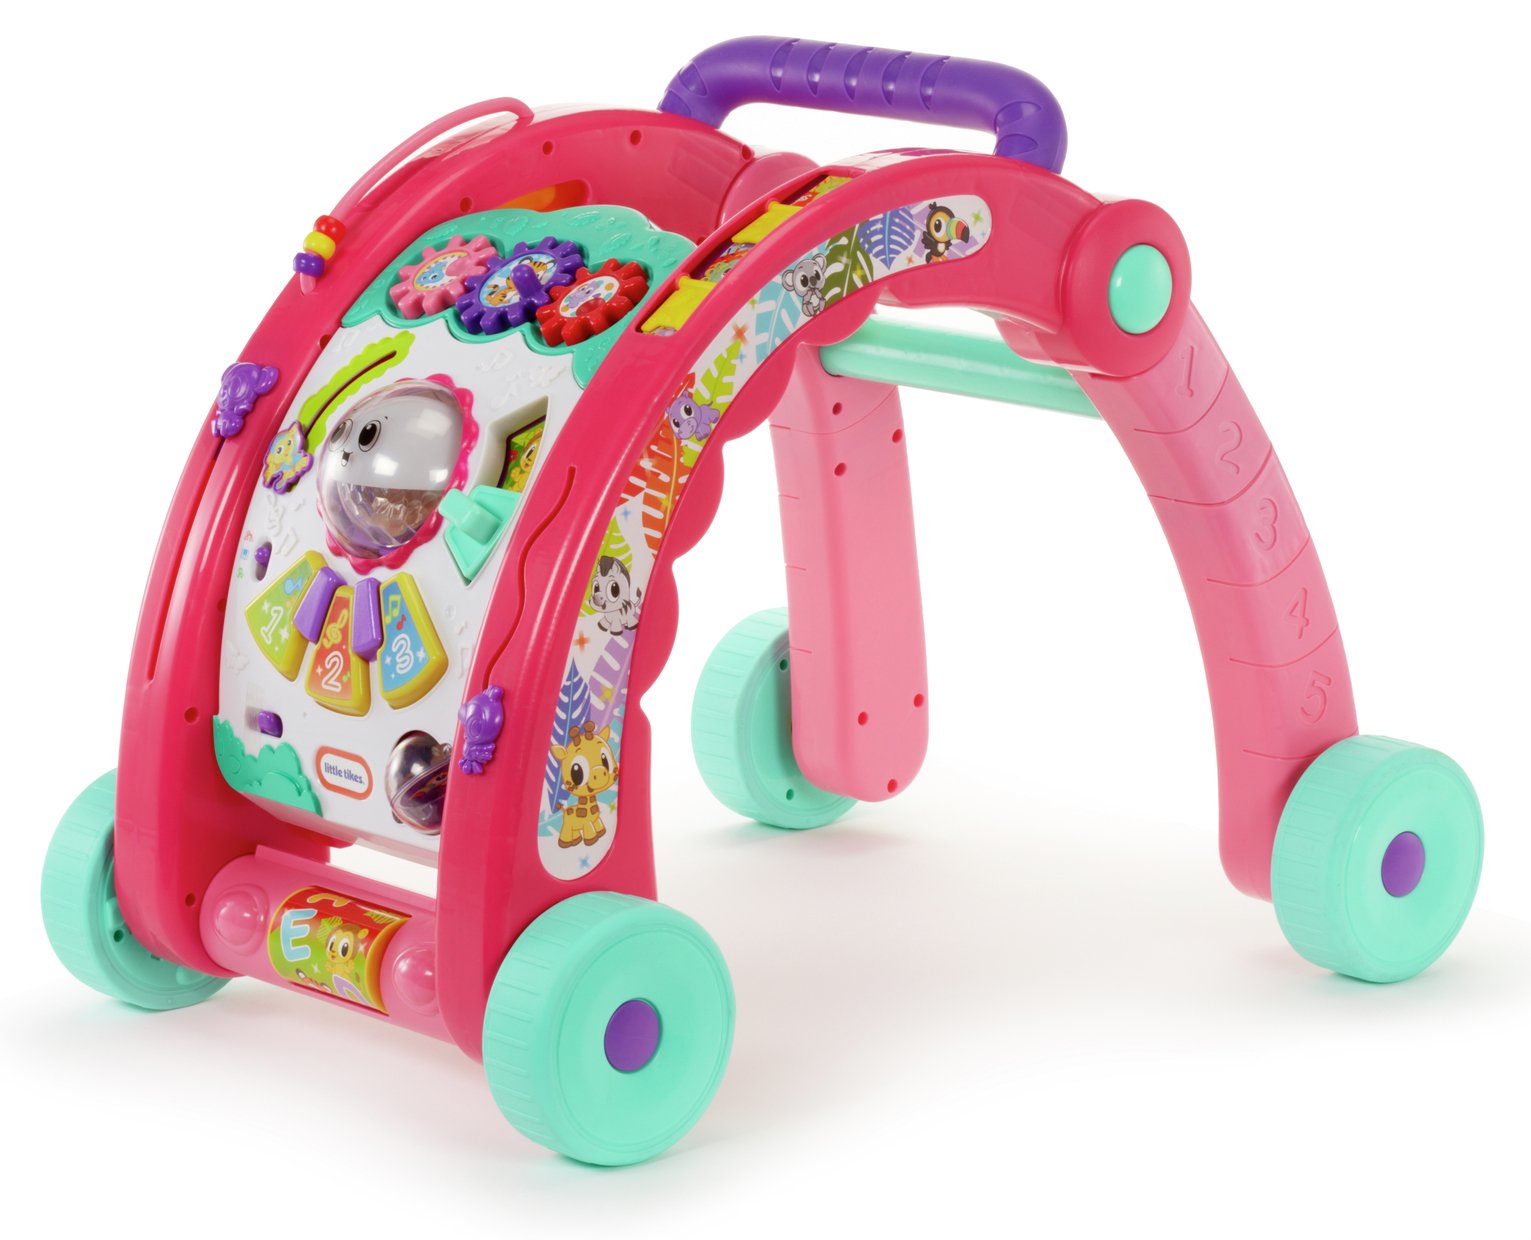 Little Tikes Fantastic Firsts 3-in-1 Activity Walker - Pink